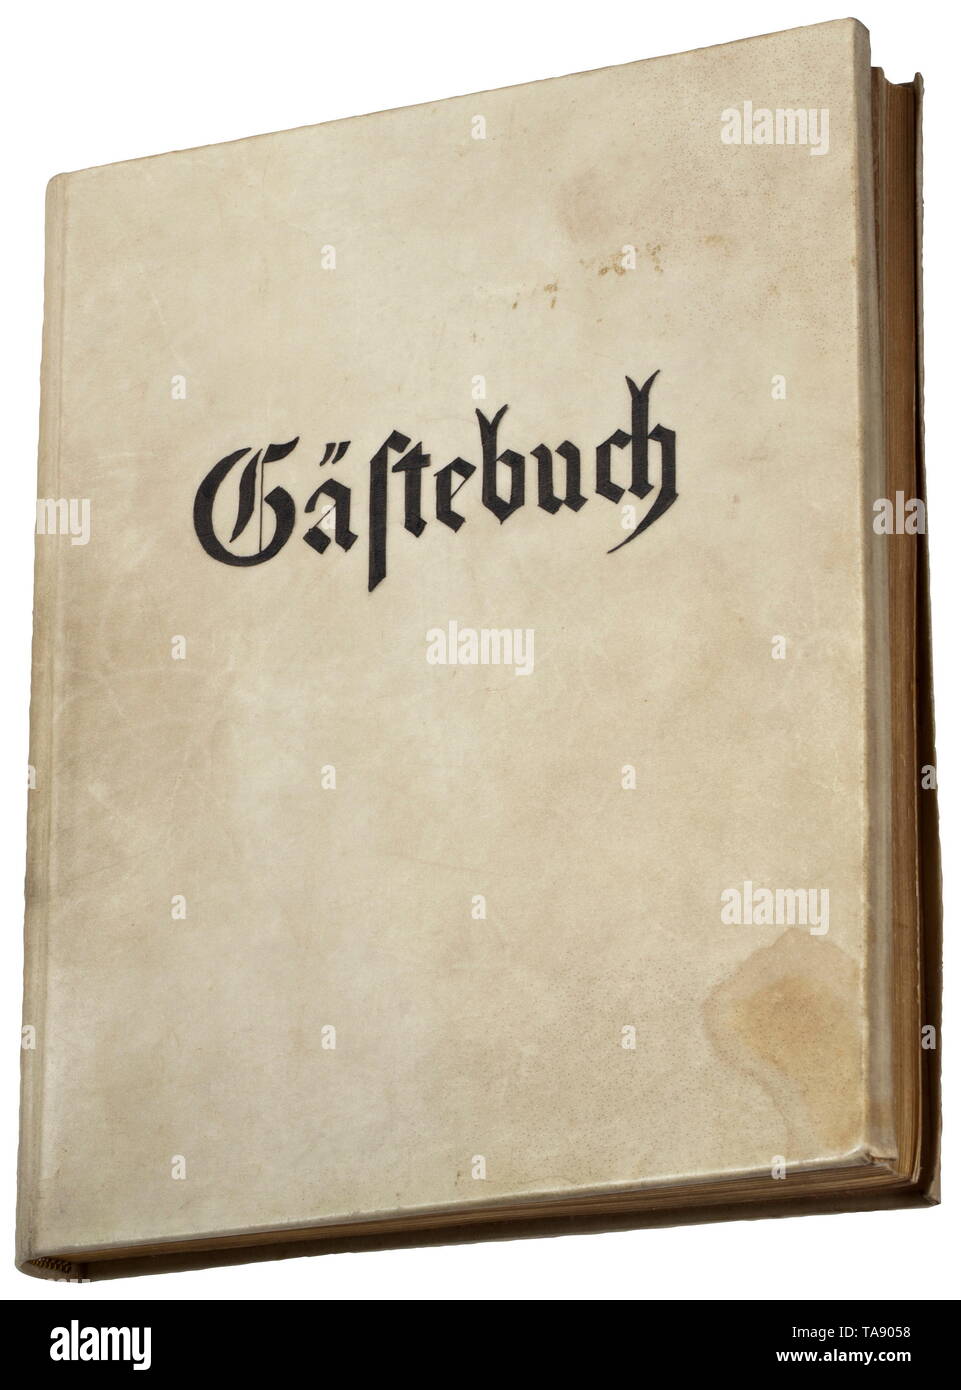 A guest book belonging to the Reich stage designer Benno von Arent (1898 - 1956) - with original signatures, including Adolf Hitler, Joseph Goebbels The book with a parchment binding (wavy) and gilt edged pages. Eminent politicians, military figures and civilians with approximately 150 original signatures and dedications spread over 27 pages, dating from the period 1938-43. Including Adolf Hitler, Joseph and Magda Goebbels, Arno Breker, Hermann Fegelein, Josef (Sepp) Dietrich, Albert Speer and others according to the enclosed list. Album dimensions circa 20 x 24.5 x 2.5 cm., Editorial-Use-Only Stock Photo